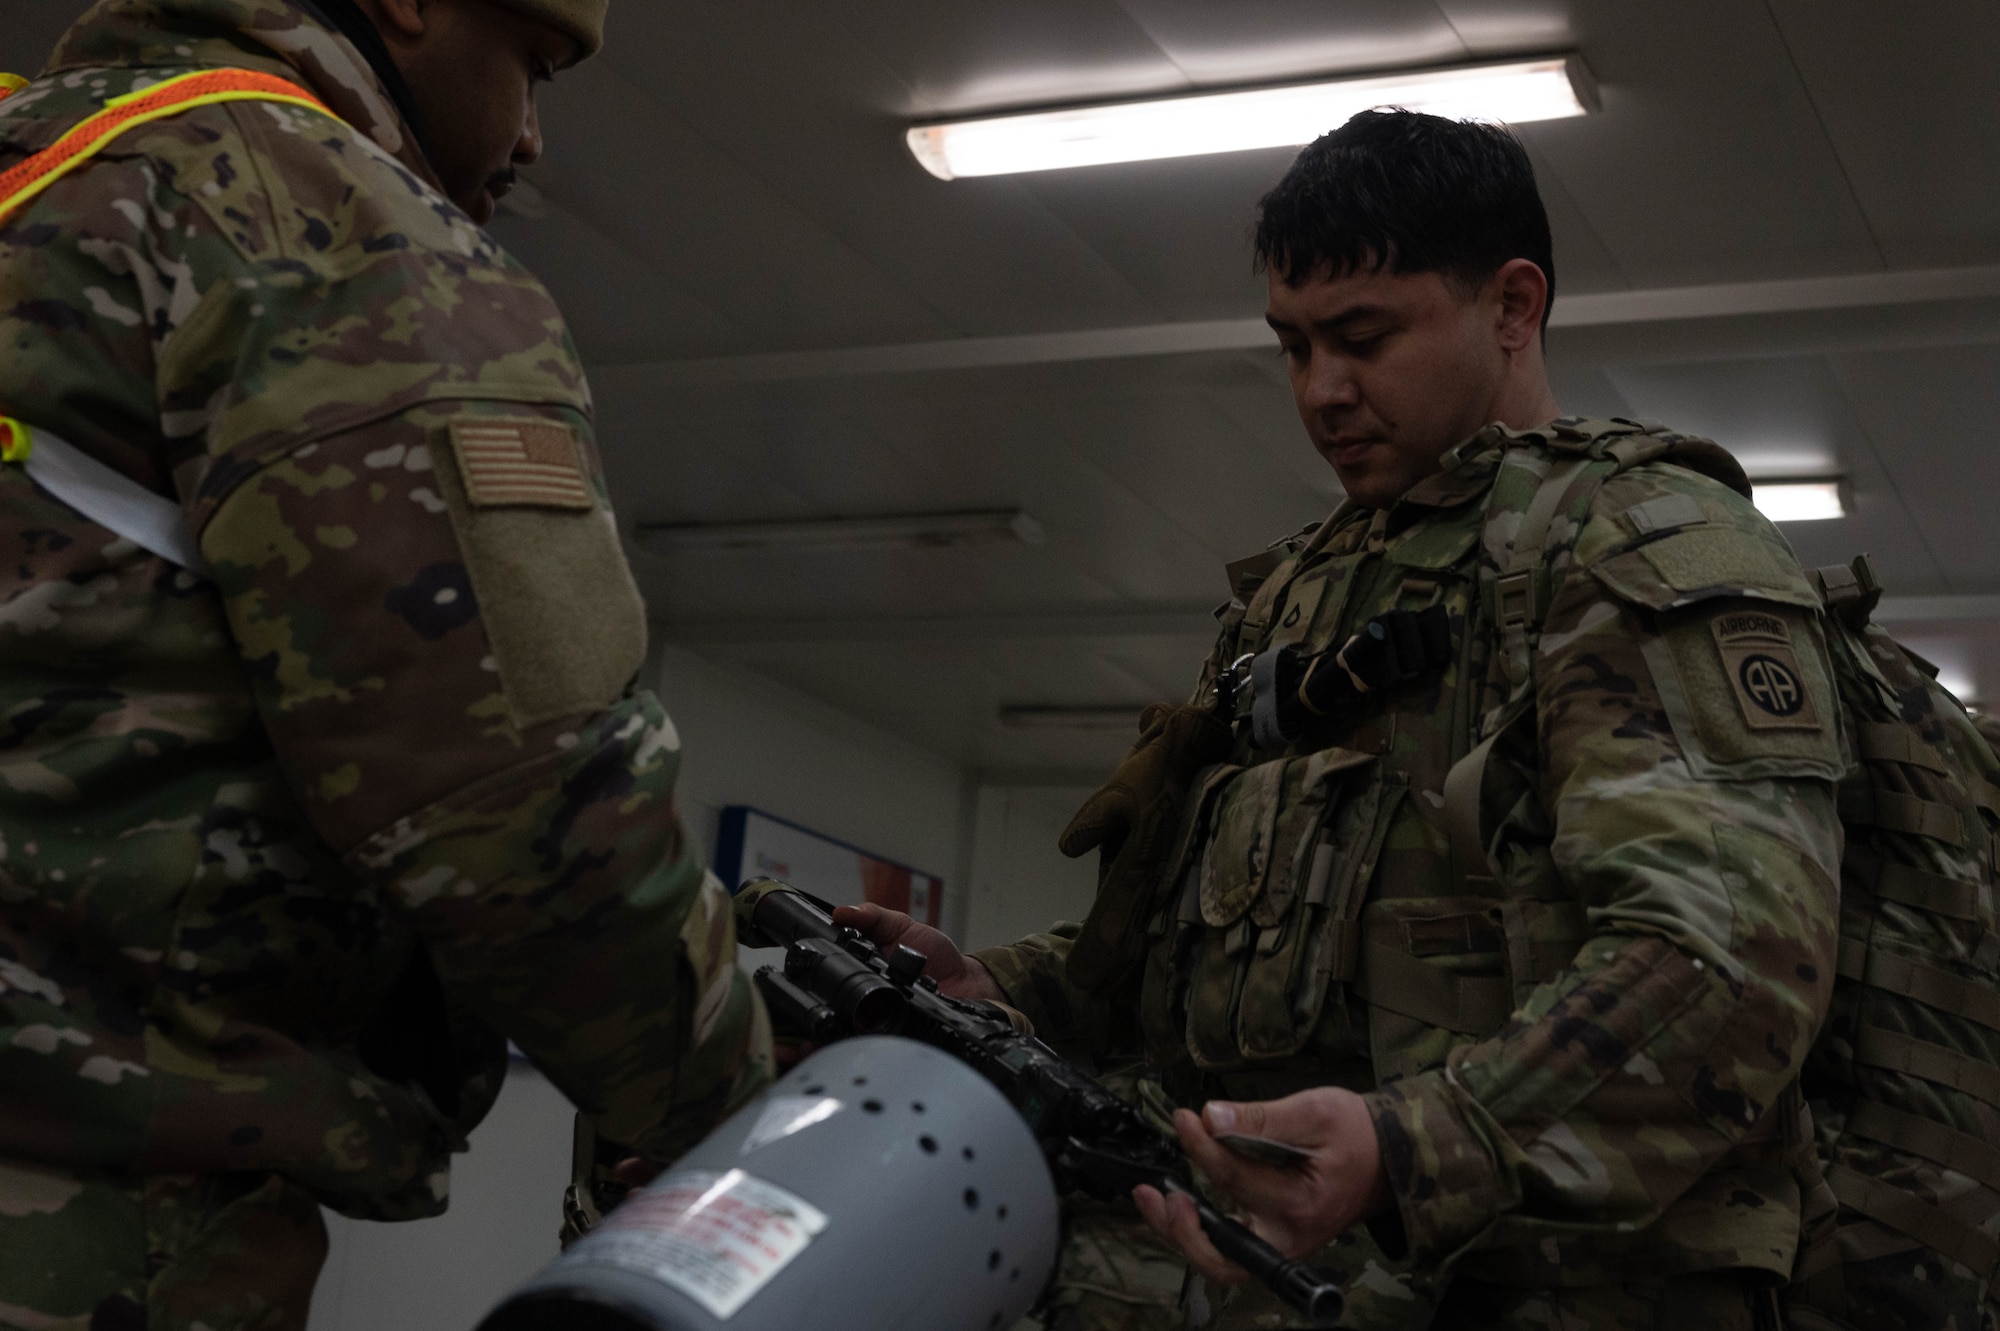 An Airman checks the chamber of a soldier's weapon.